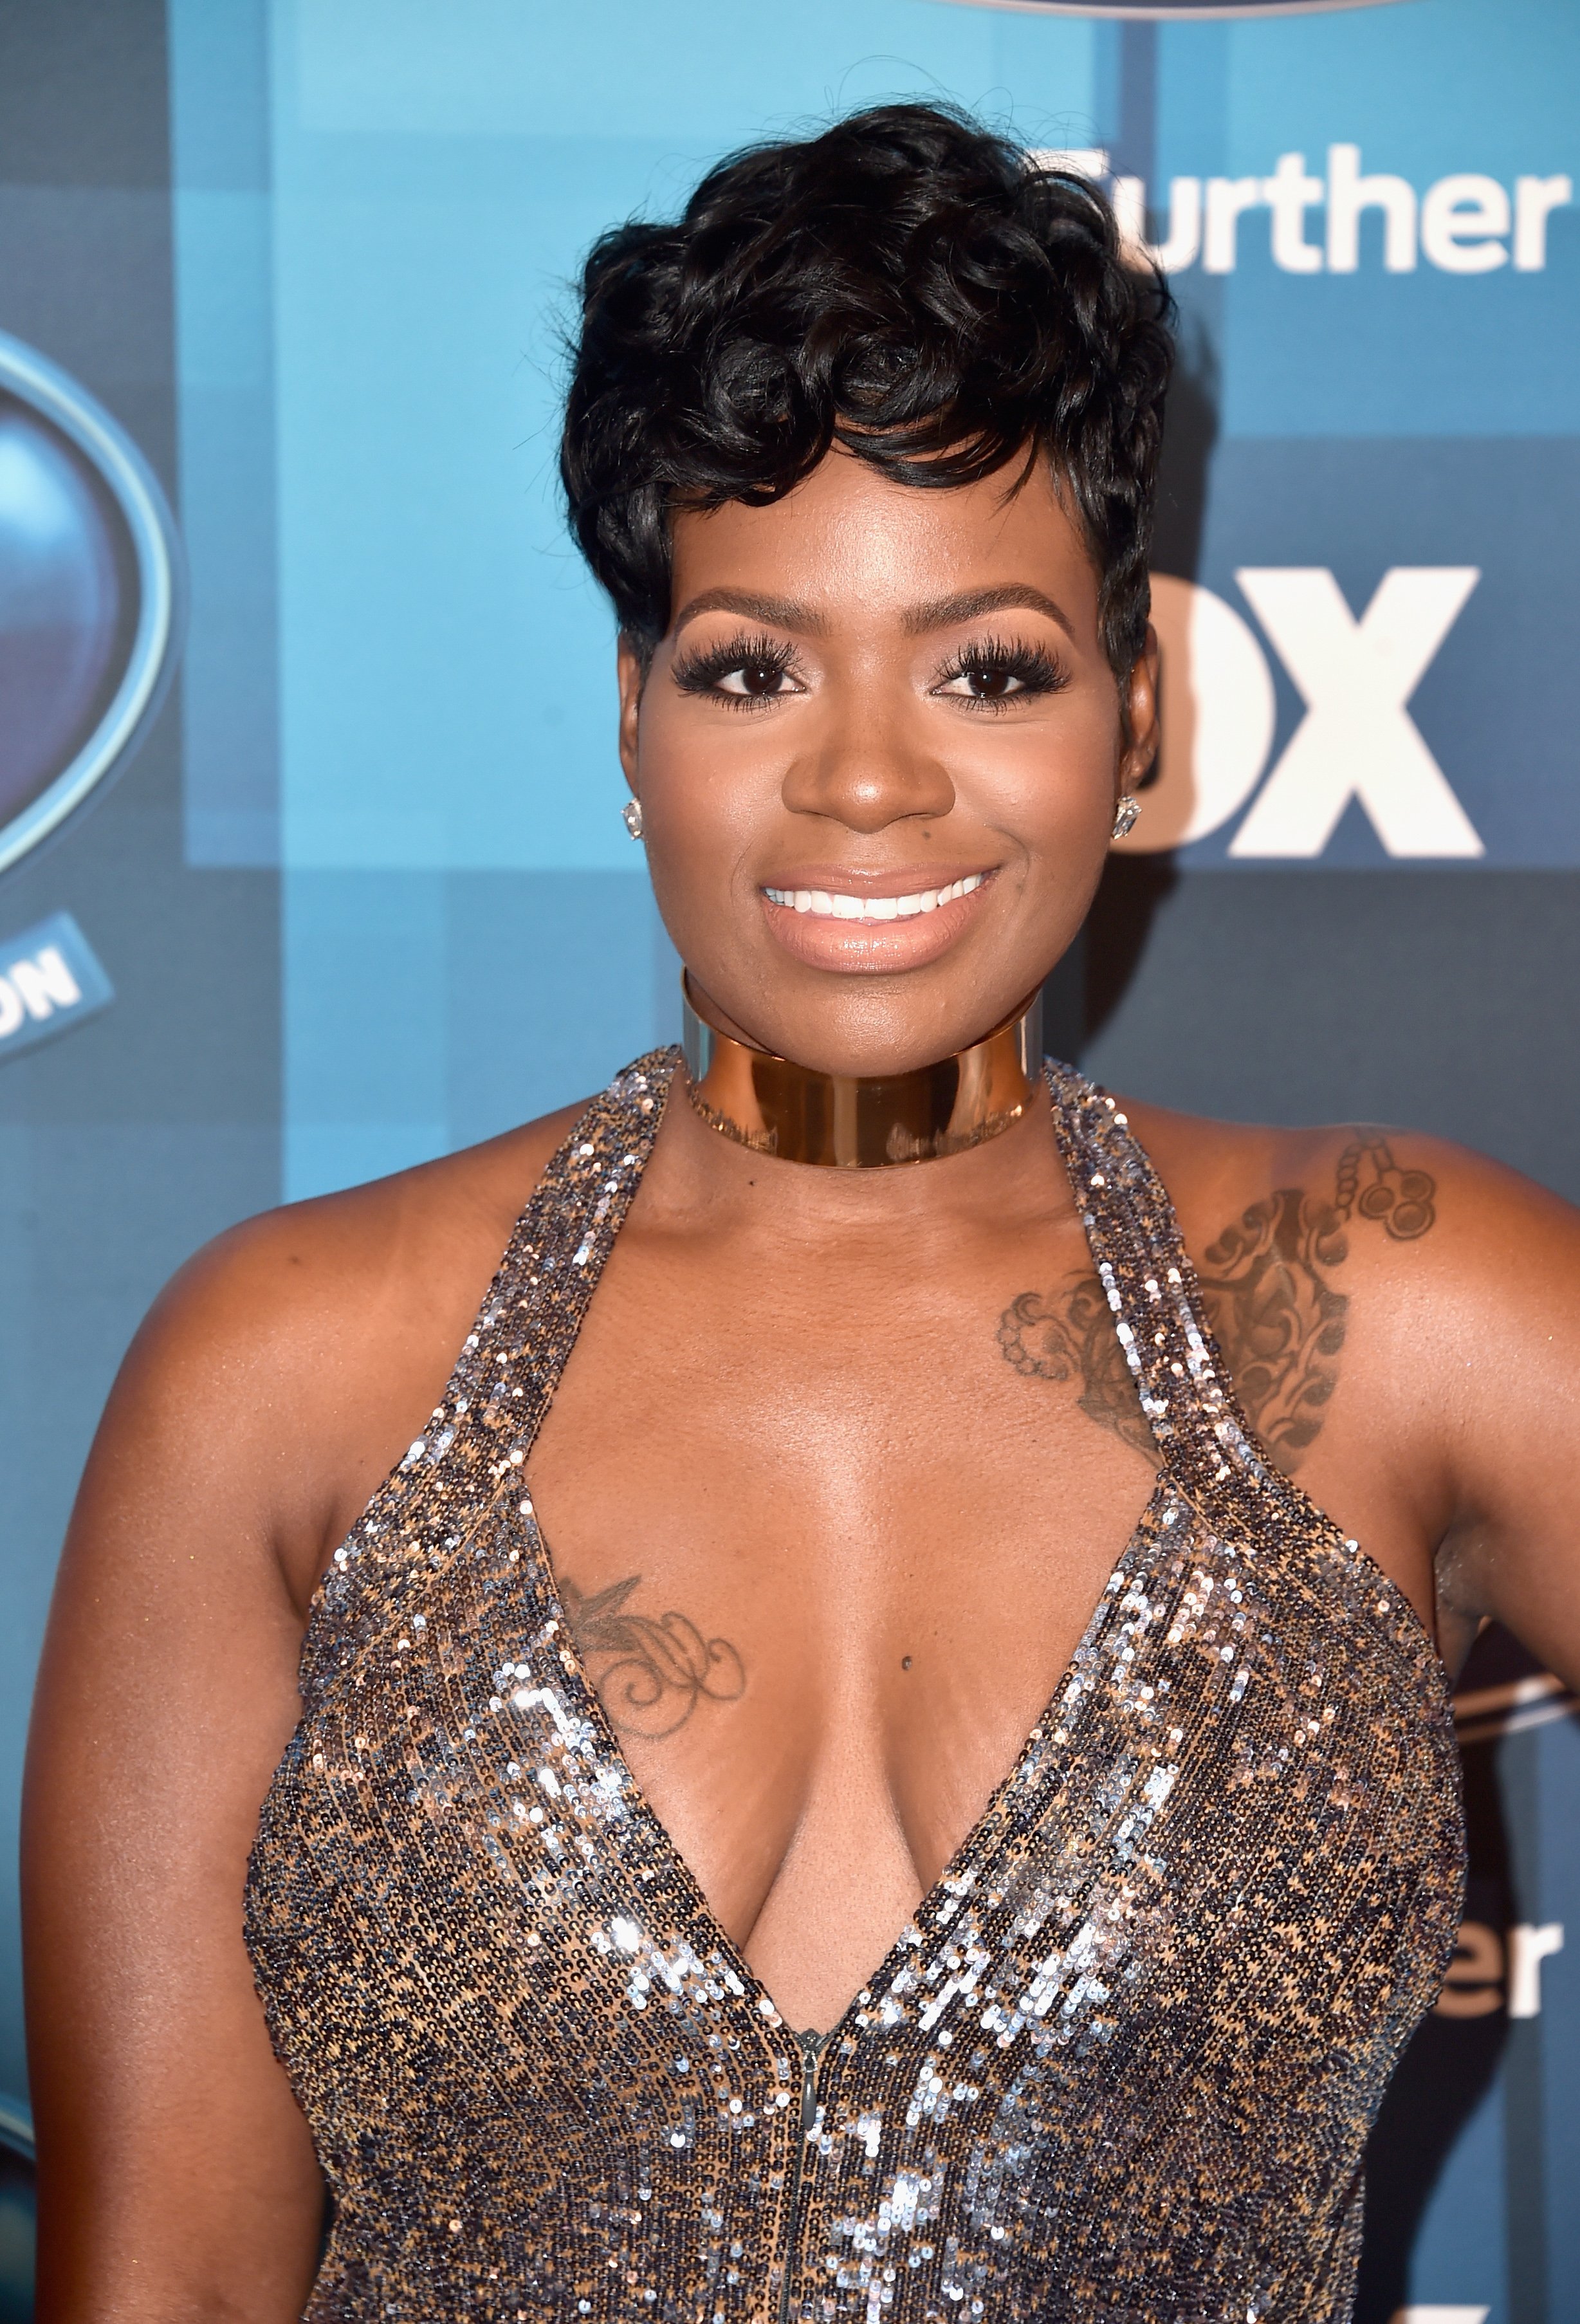 Fantasia Barrino at the "American Idol" finale on April 7, 2016 in California | Photo: Getty Images